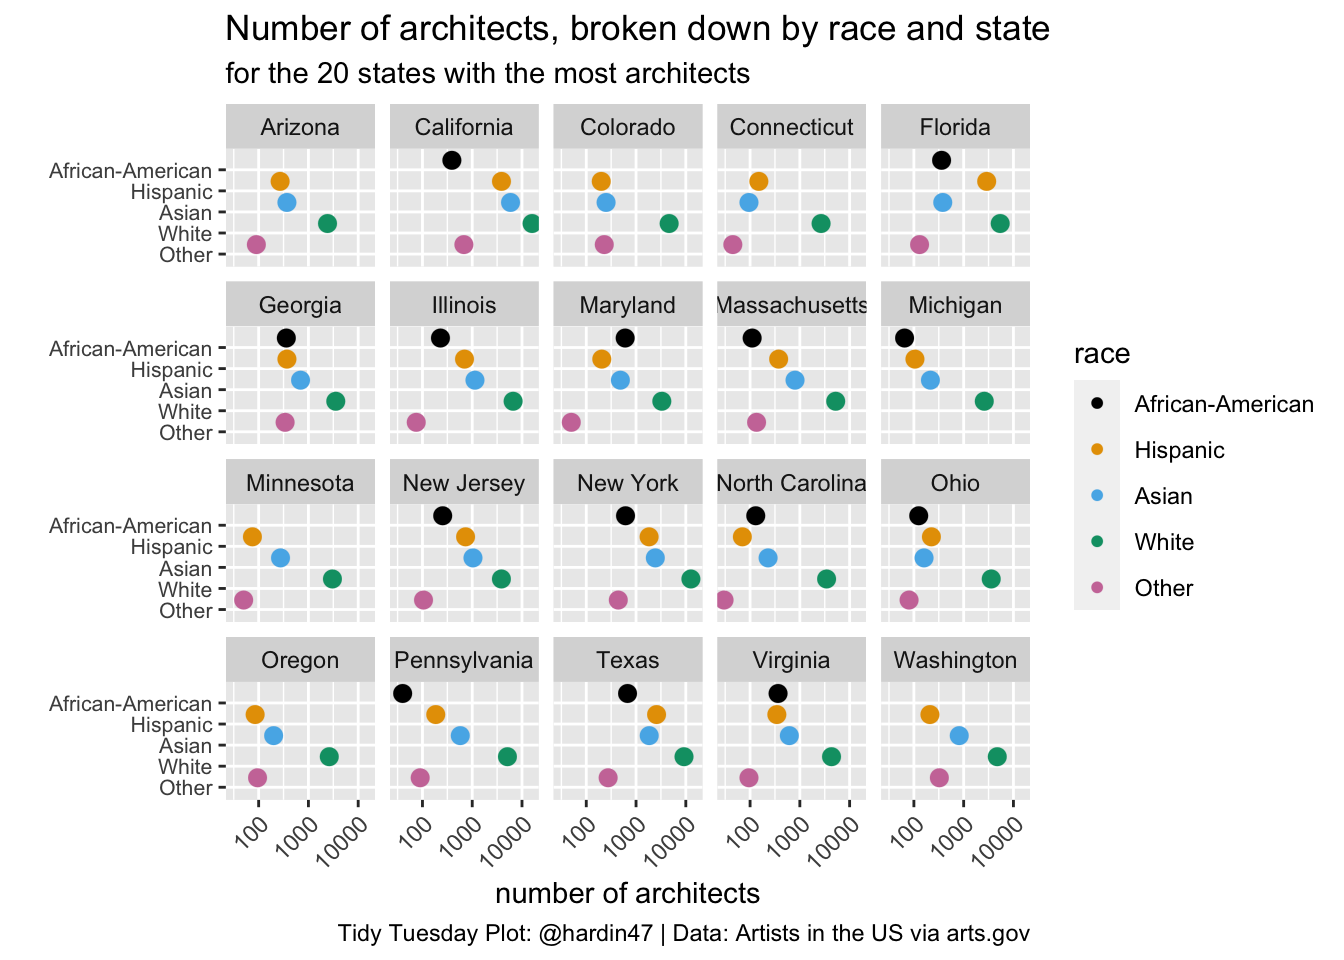 Twenty different plots, one for each fo the 20 states with the most architects.  On each plot, the x-axis is the number of architects, the y-axis is the race, there are five dots on each plot (for each of African-American, Hispanic, Asian, White and Other).